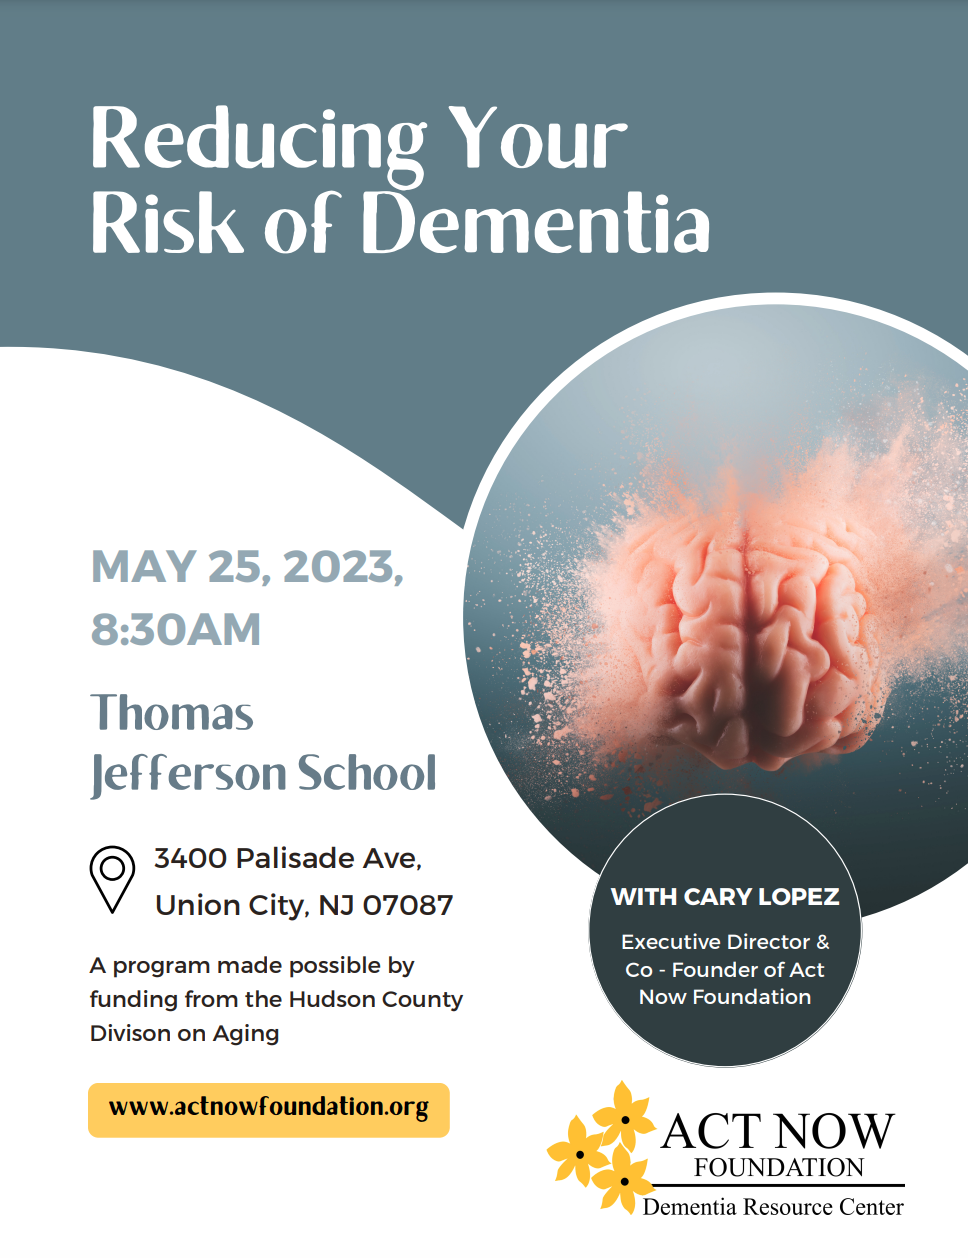 Reducing Your Risk of Dementia Program at the Jefferson School-English Flyer